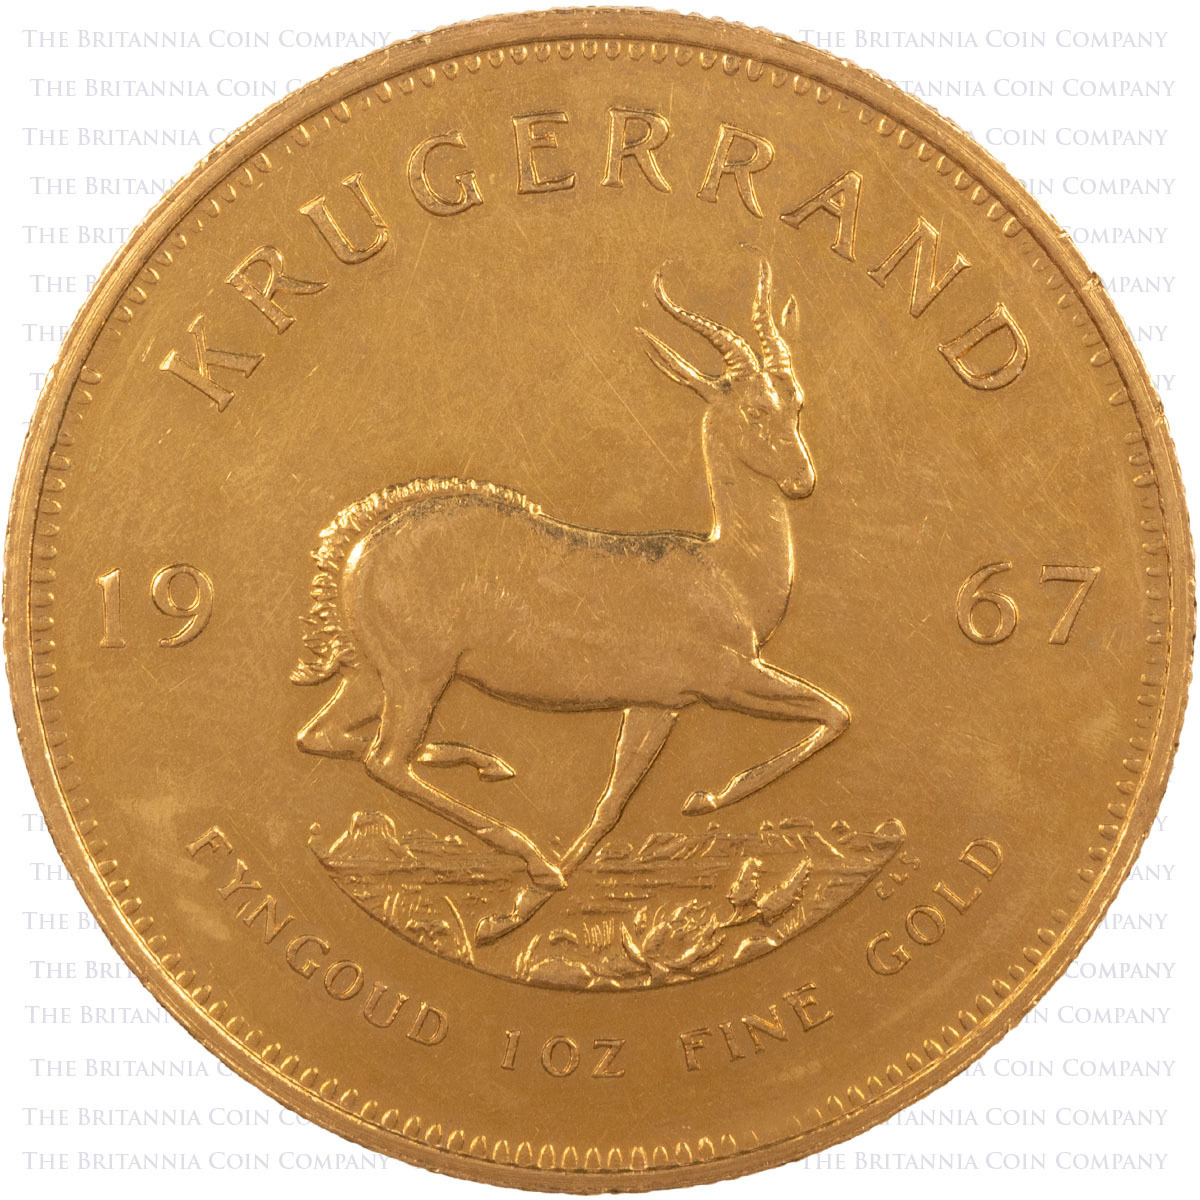 1967 Krugerrand One Ounce Gold South African Coin Reverse